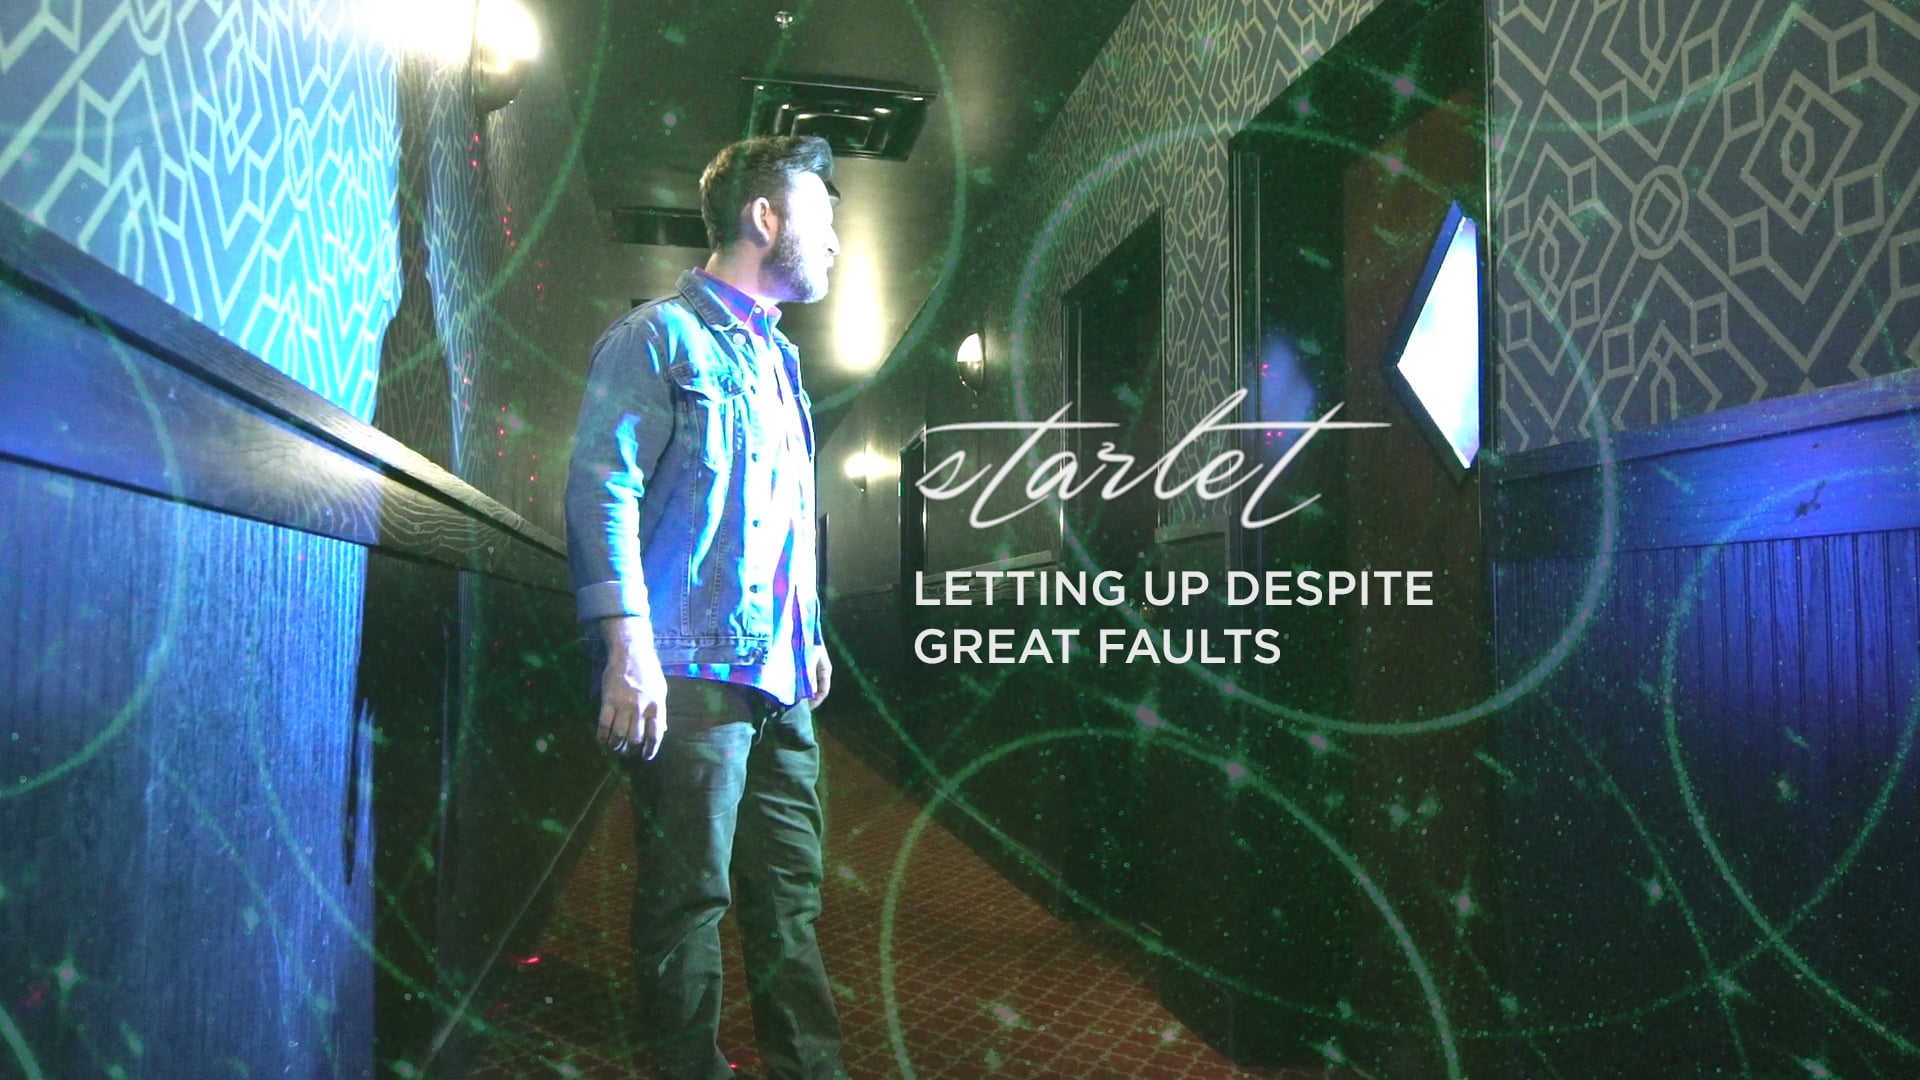 Letting Up Despite Great Faults - Starlet